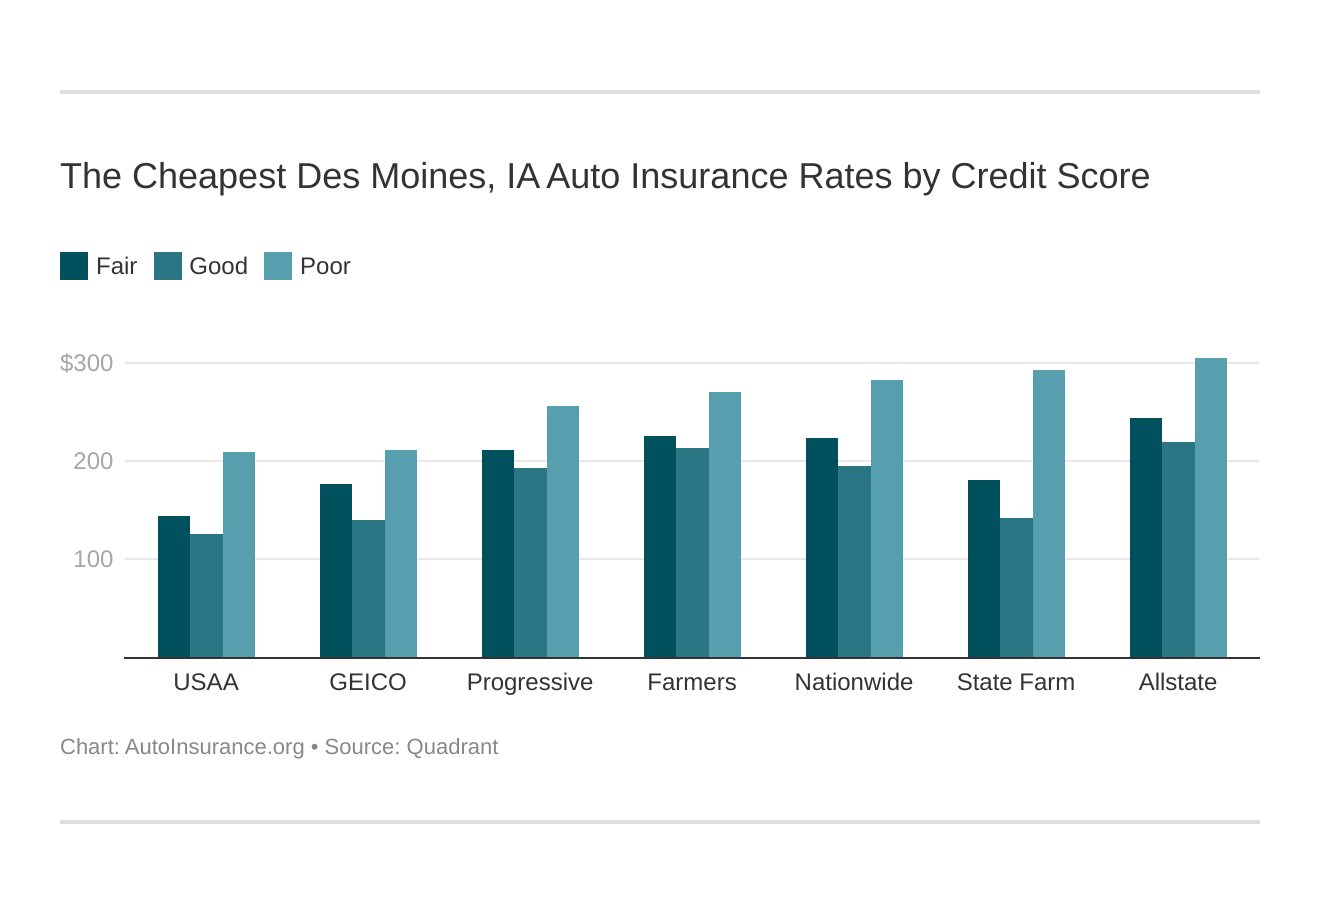 The Cheapest Des Moines, IA Auto Insurance Rates by Credit Score